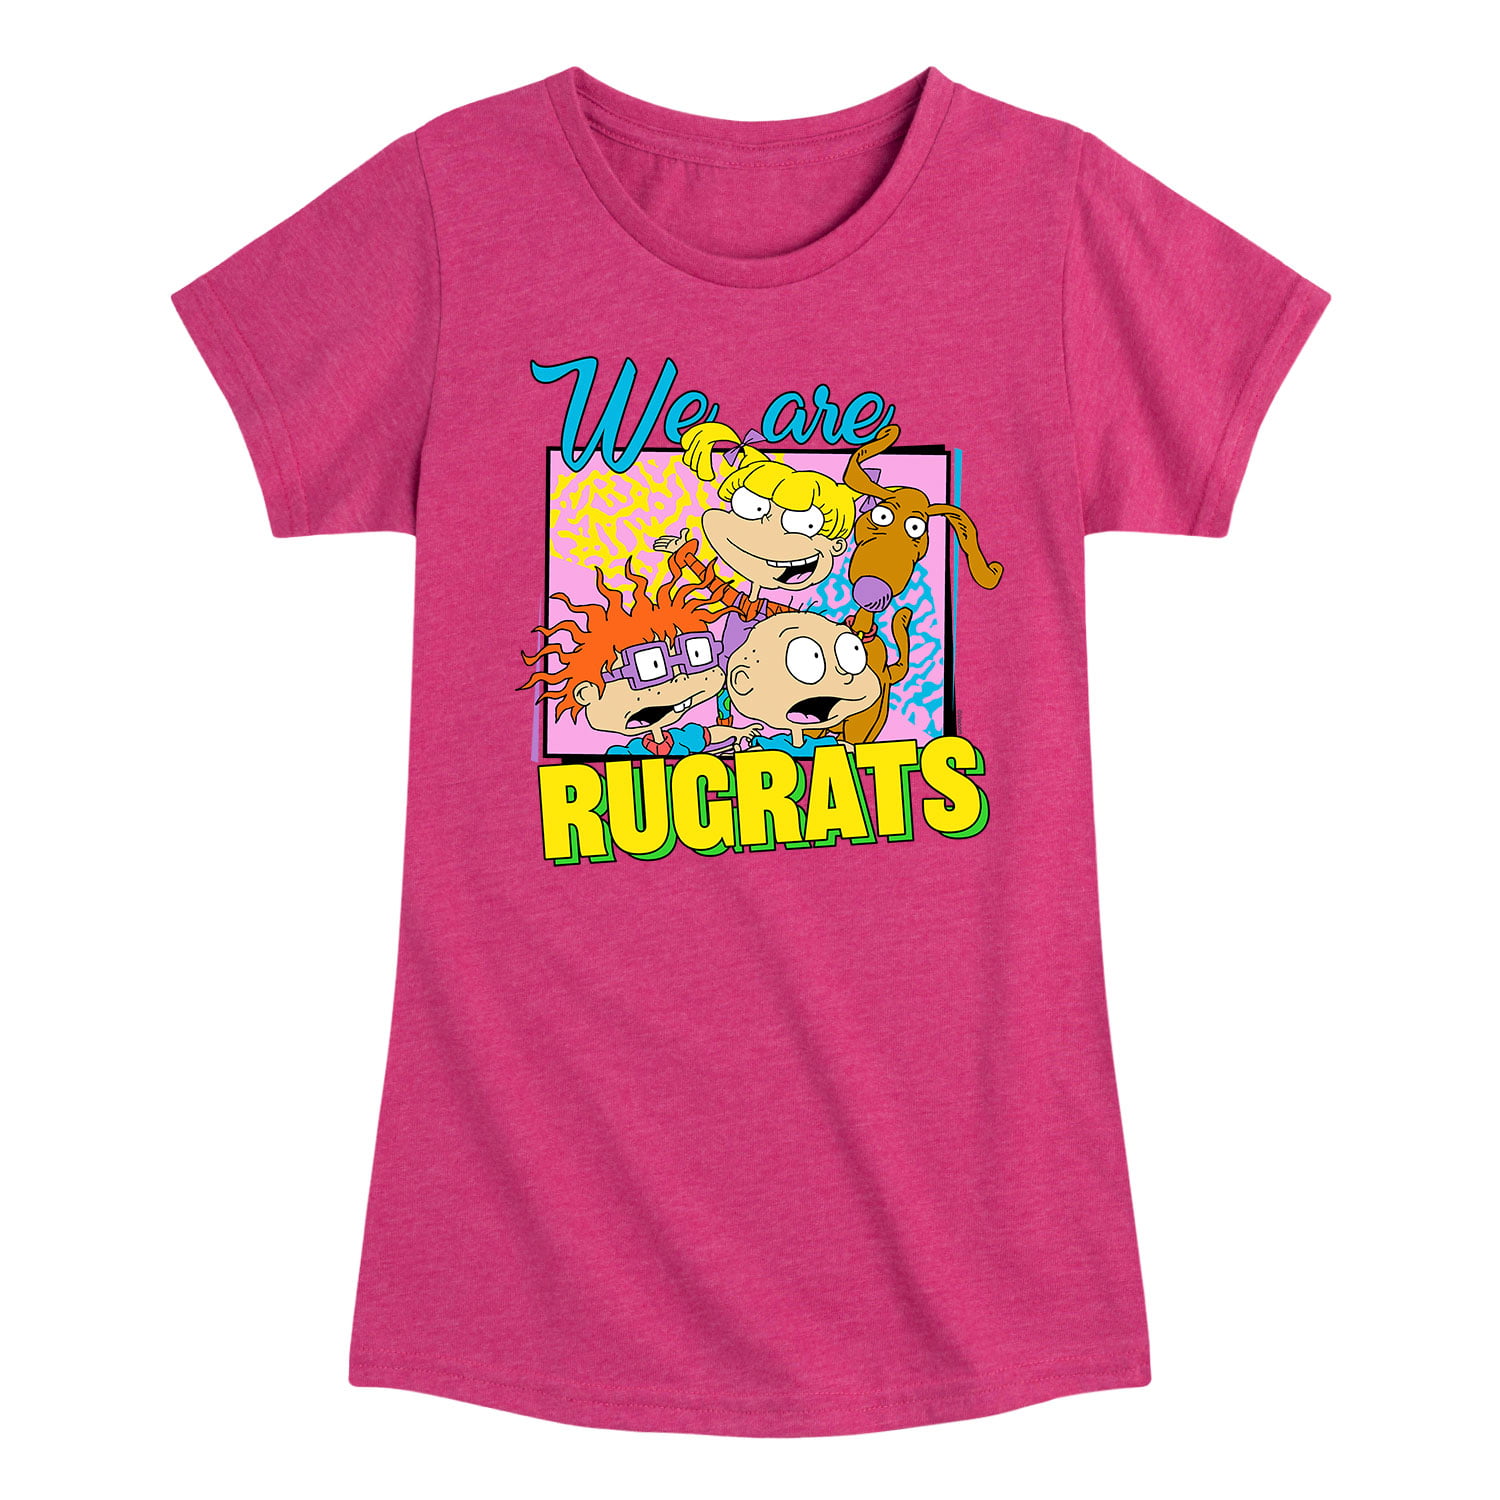 Rugrats - We Are Rugrats - Toddler And Youth Girls Short Sleeve Graphic ...